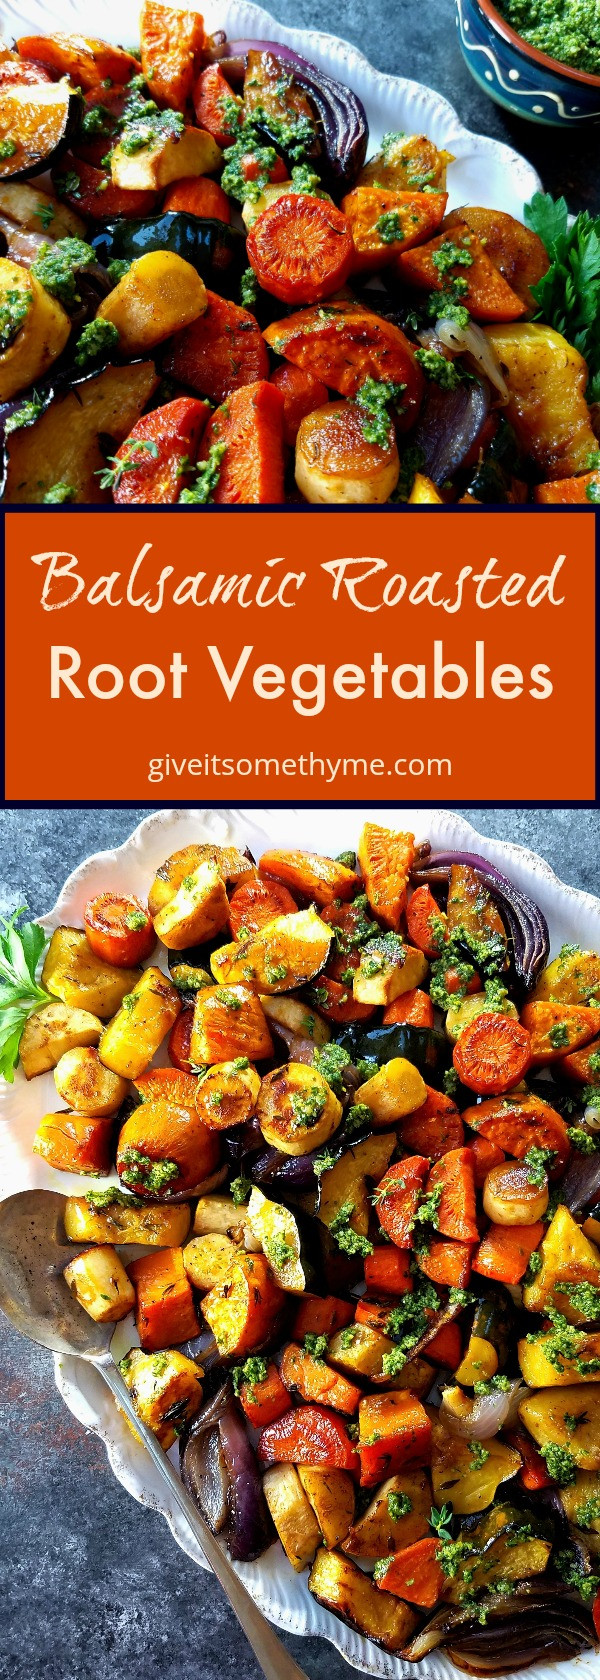 Roasted Vegetables With Balsamic Vinegar
 Balsamic Roasted Root Ve ables Give it Some Thyme